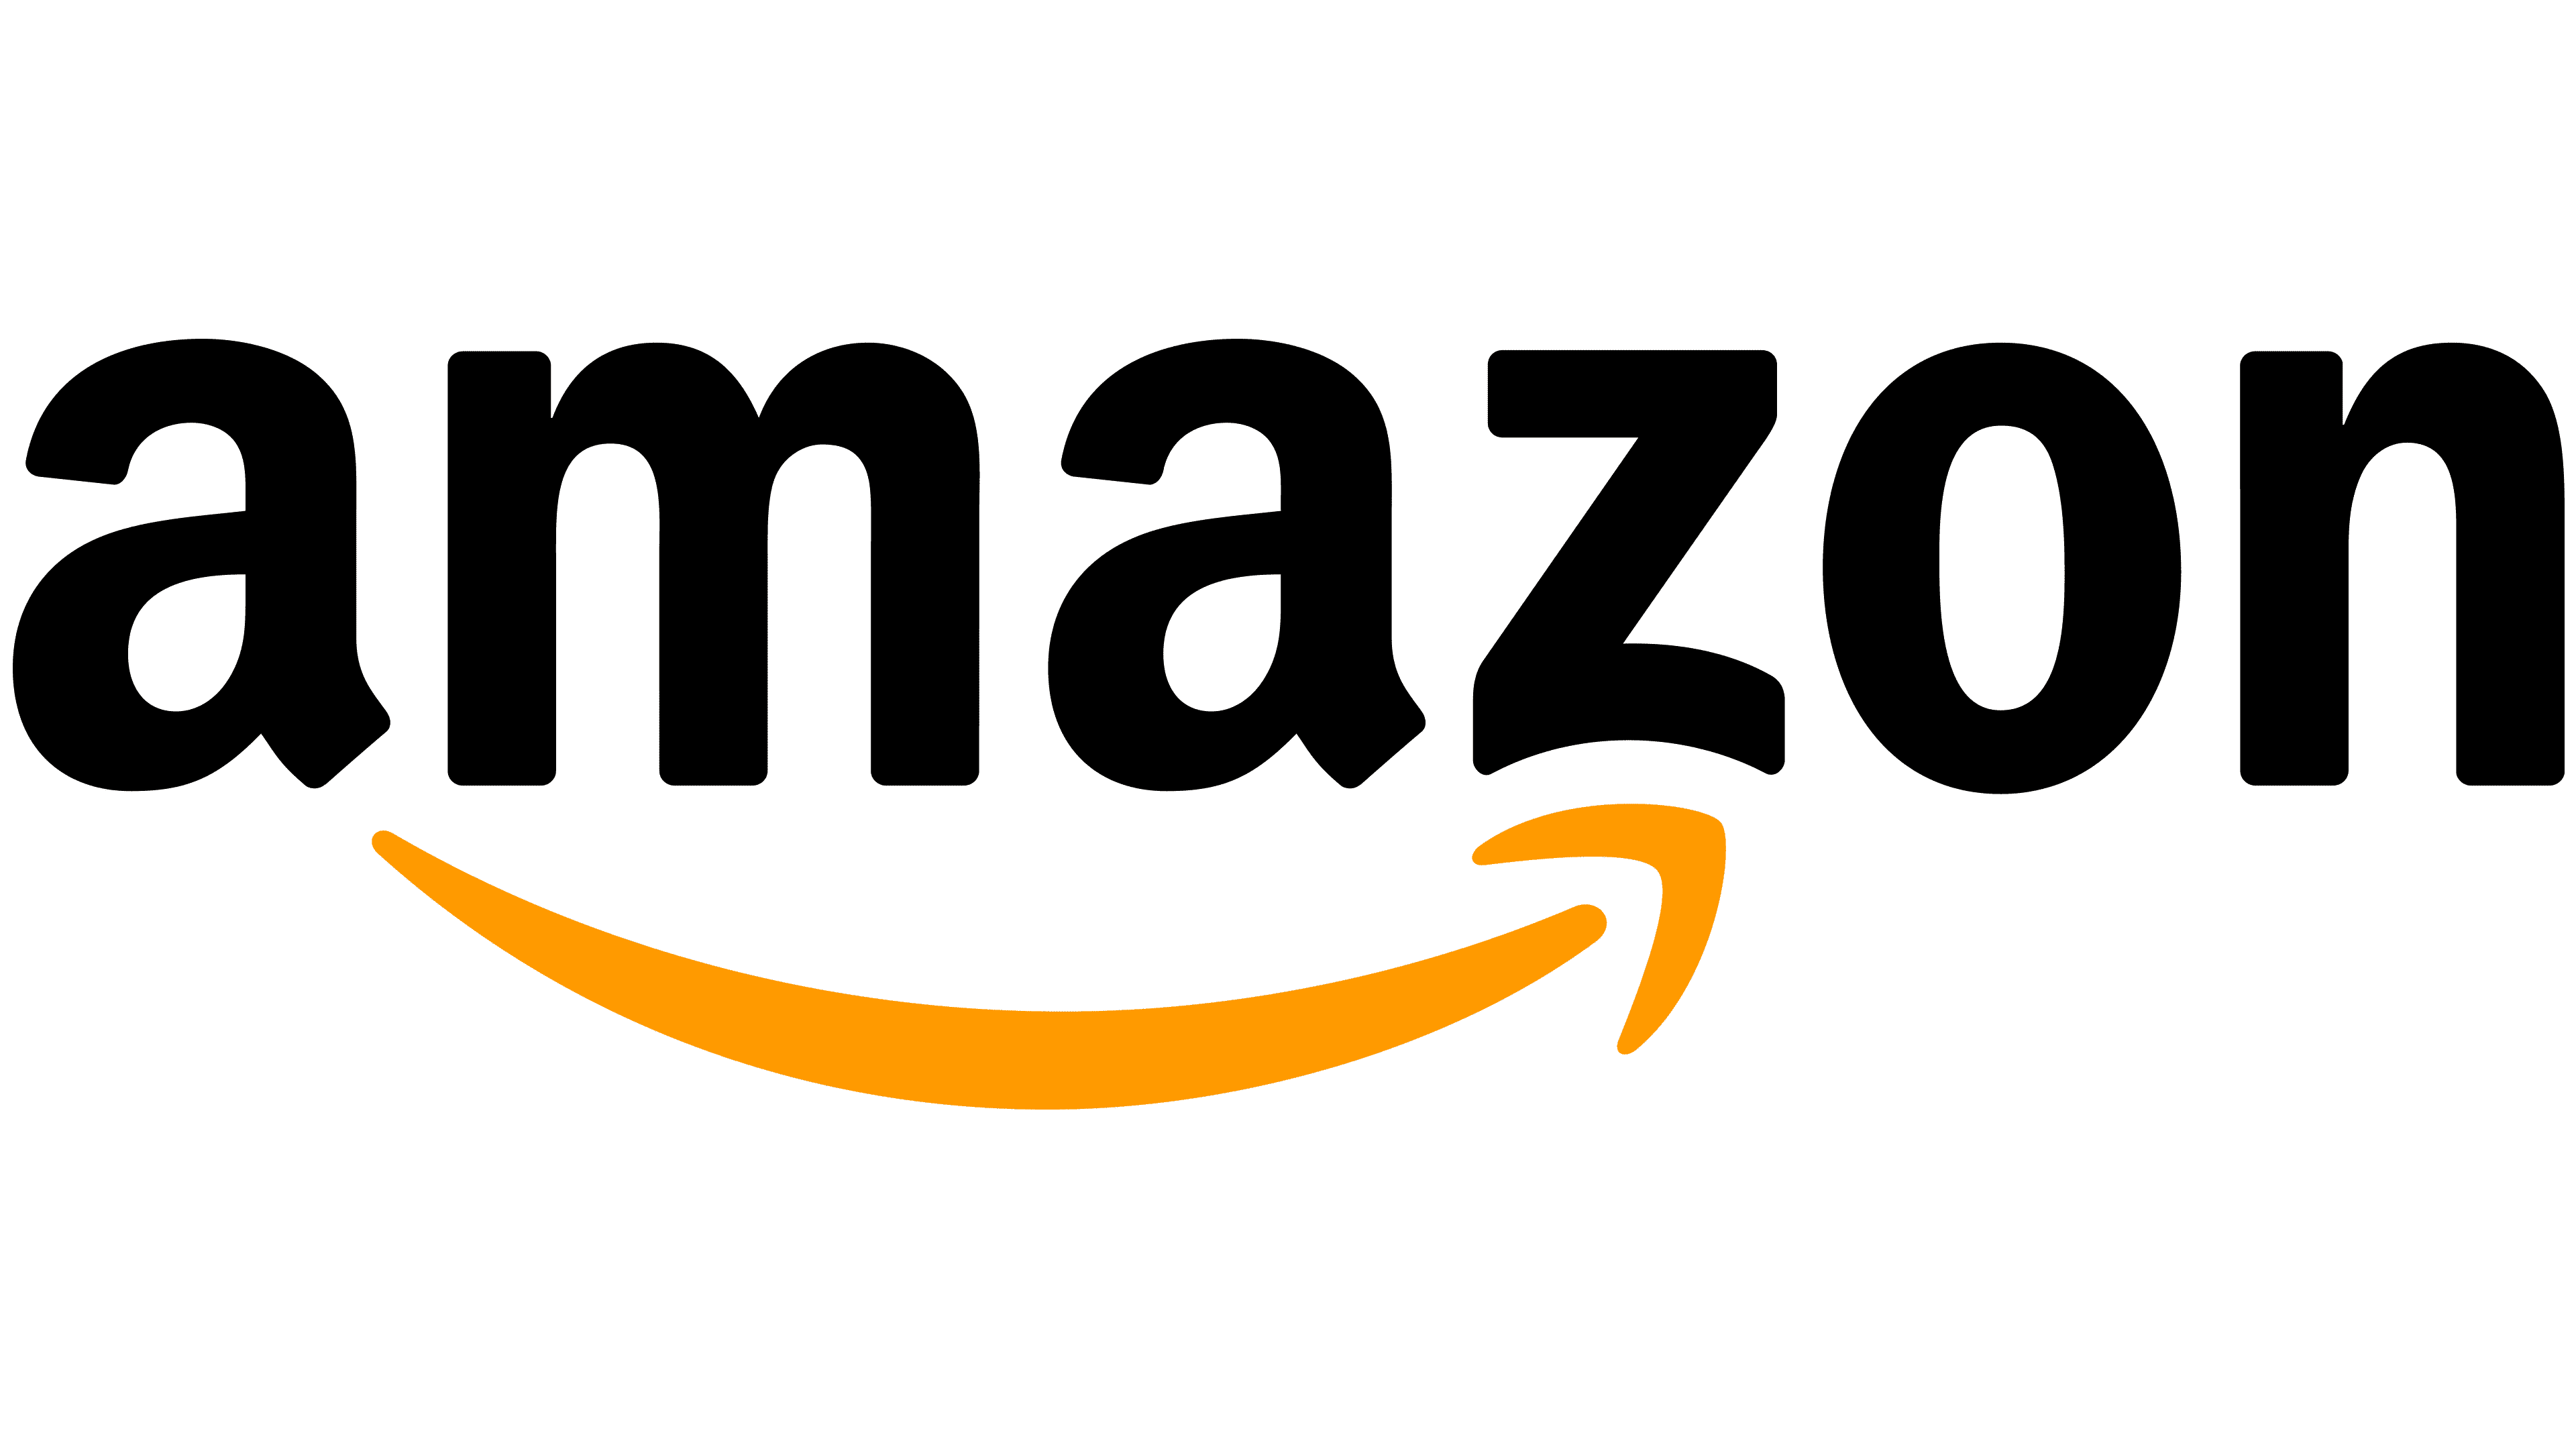 Amazon Logo and symbol, meaning, history, sign.